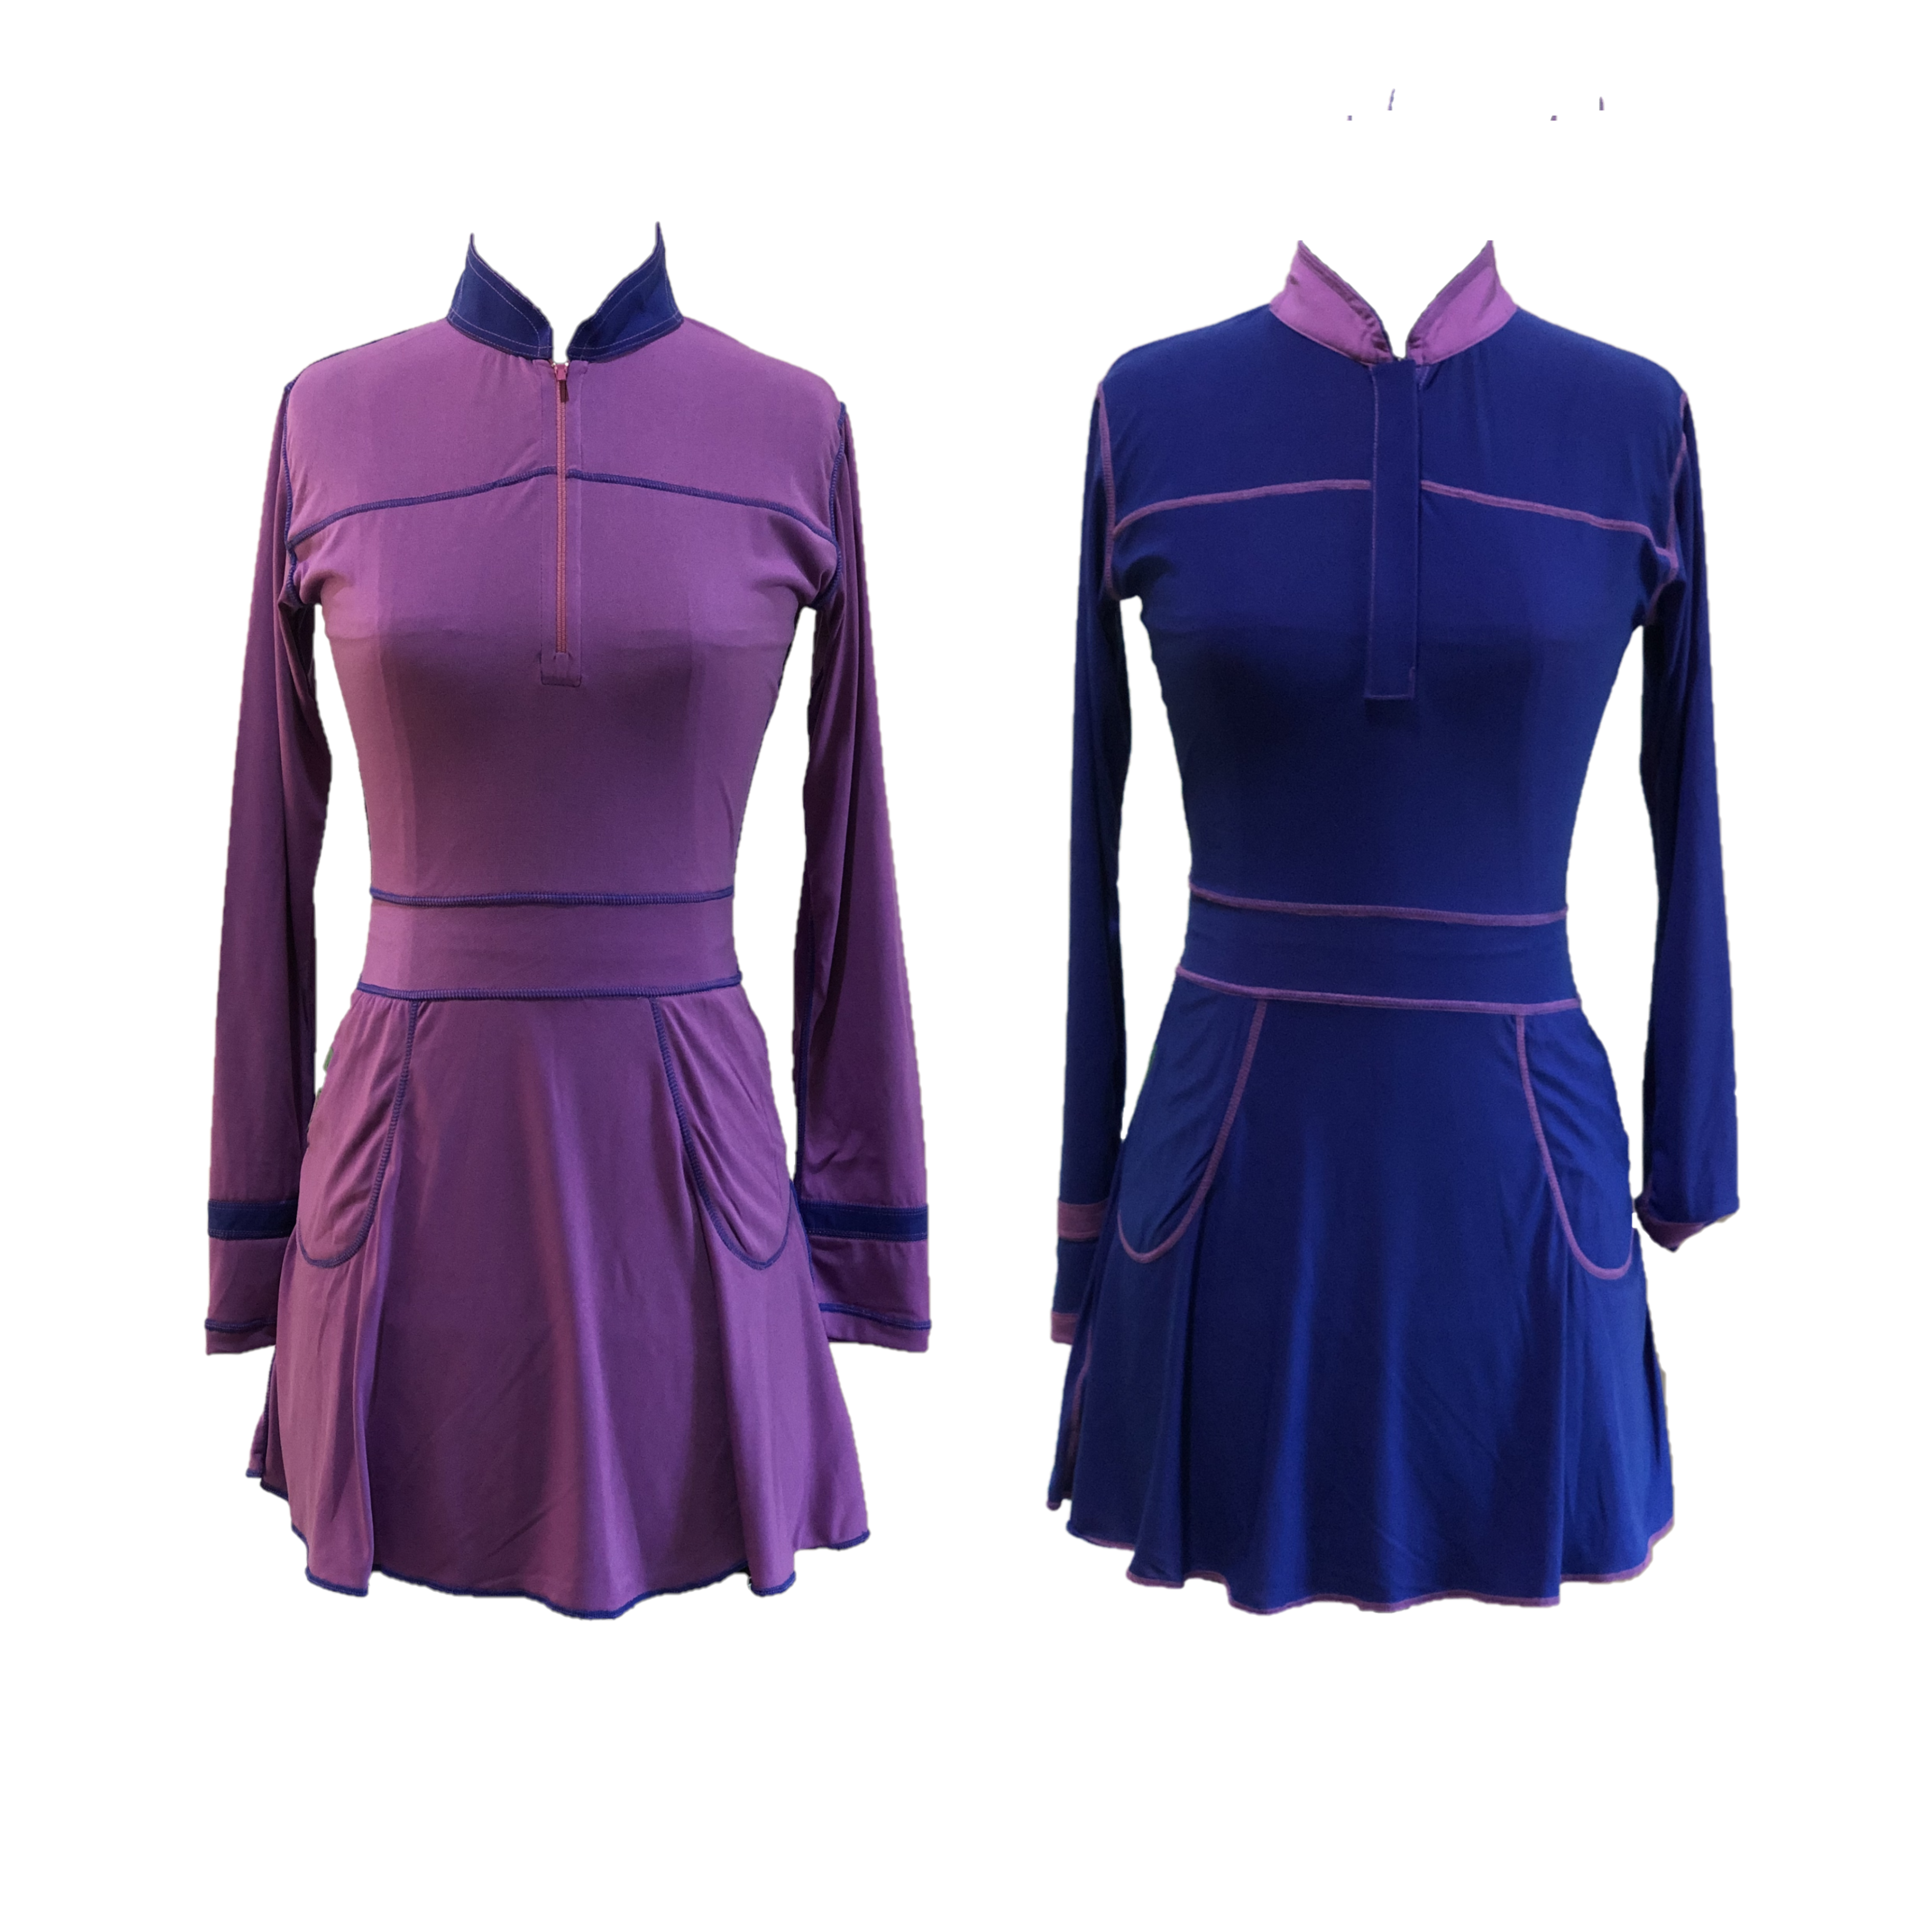 RGD-023A || Golf Dress Reversible Long Sleeve One Side Purple / Mauve with Featured Contrasting Navy Blue Overlocked Stitched Seams Other Side Navy Blue with Featured Contrasting Purple Overlocked Stitched Seams, Mandarin Collar Zip Fastened, 2 Side Entry Patch